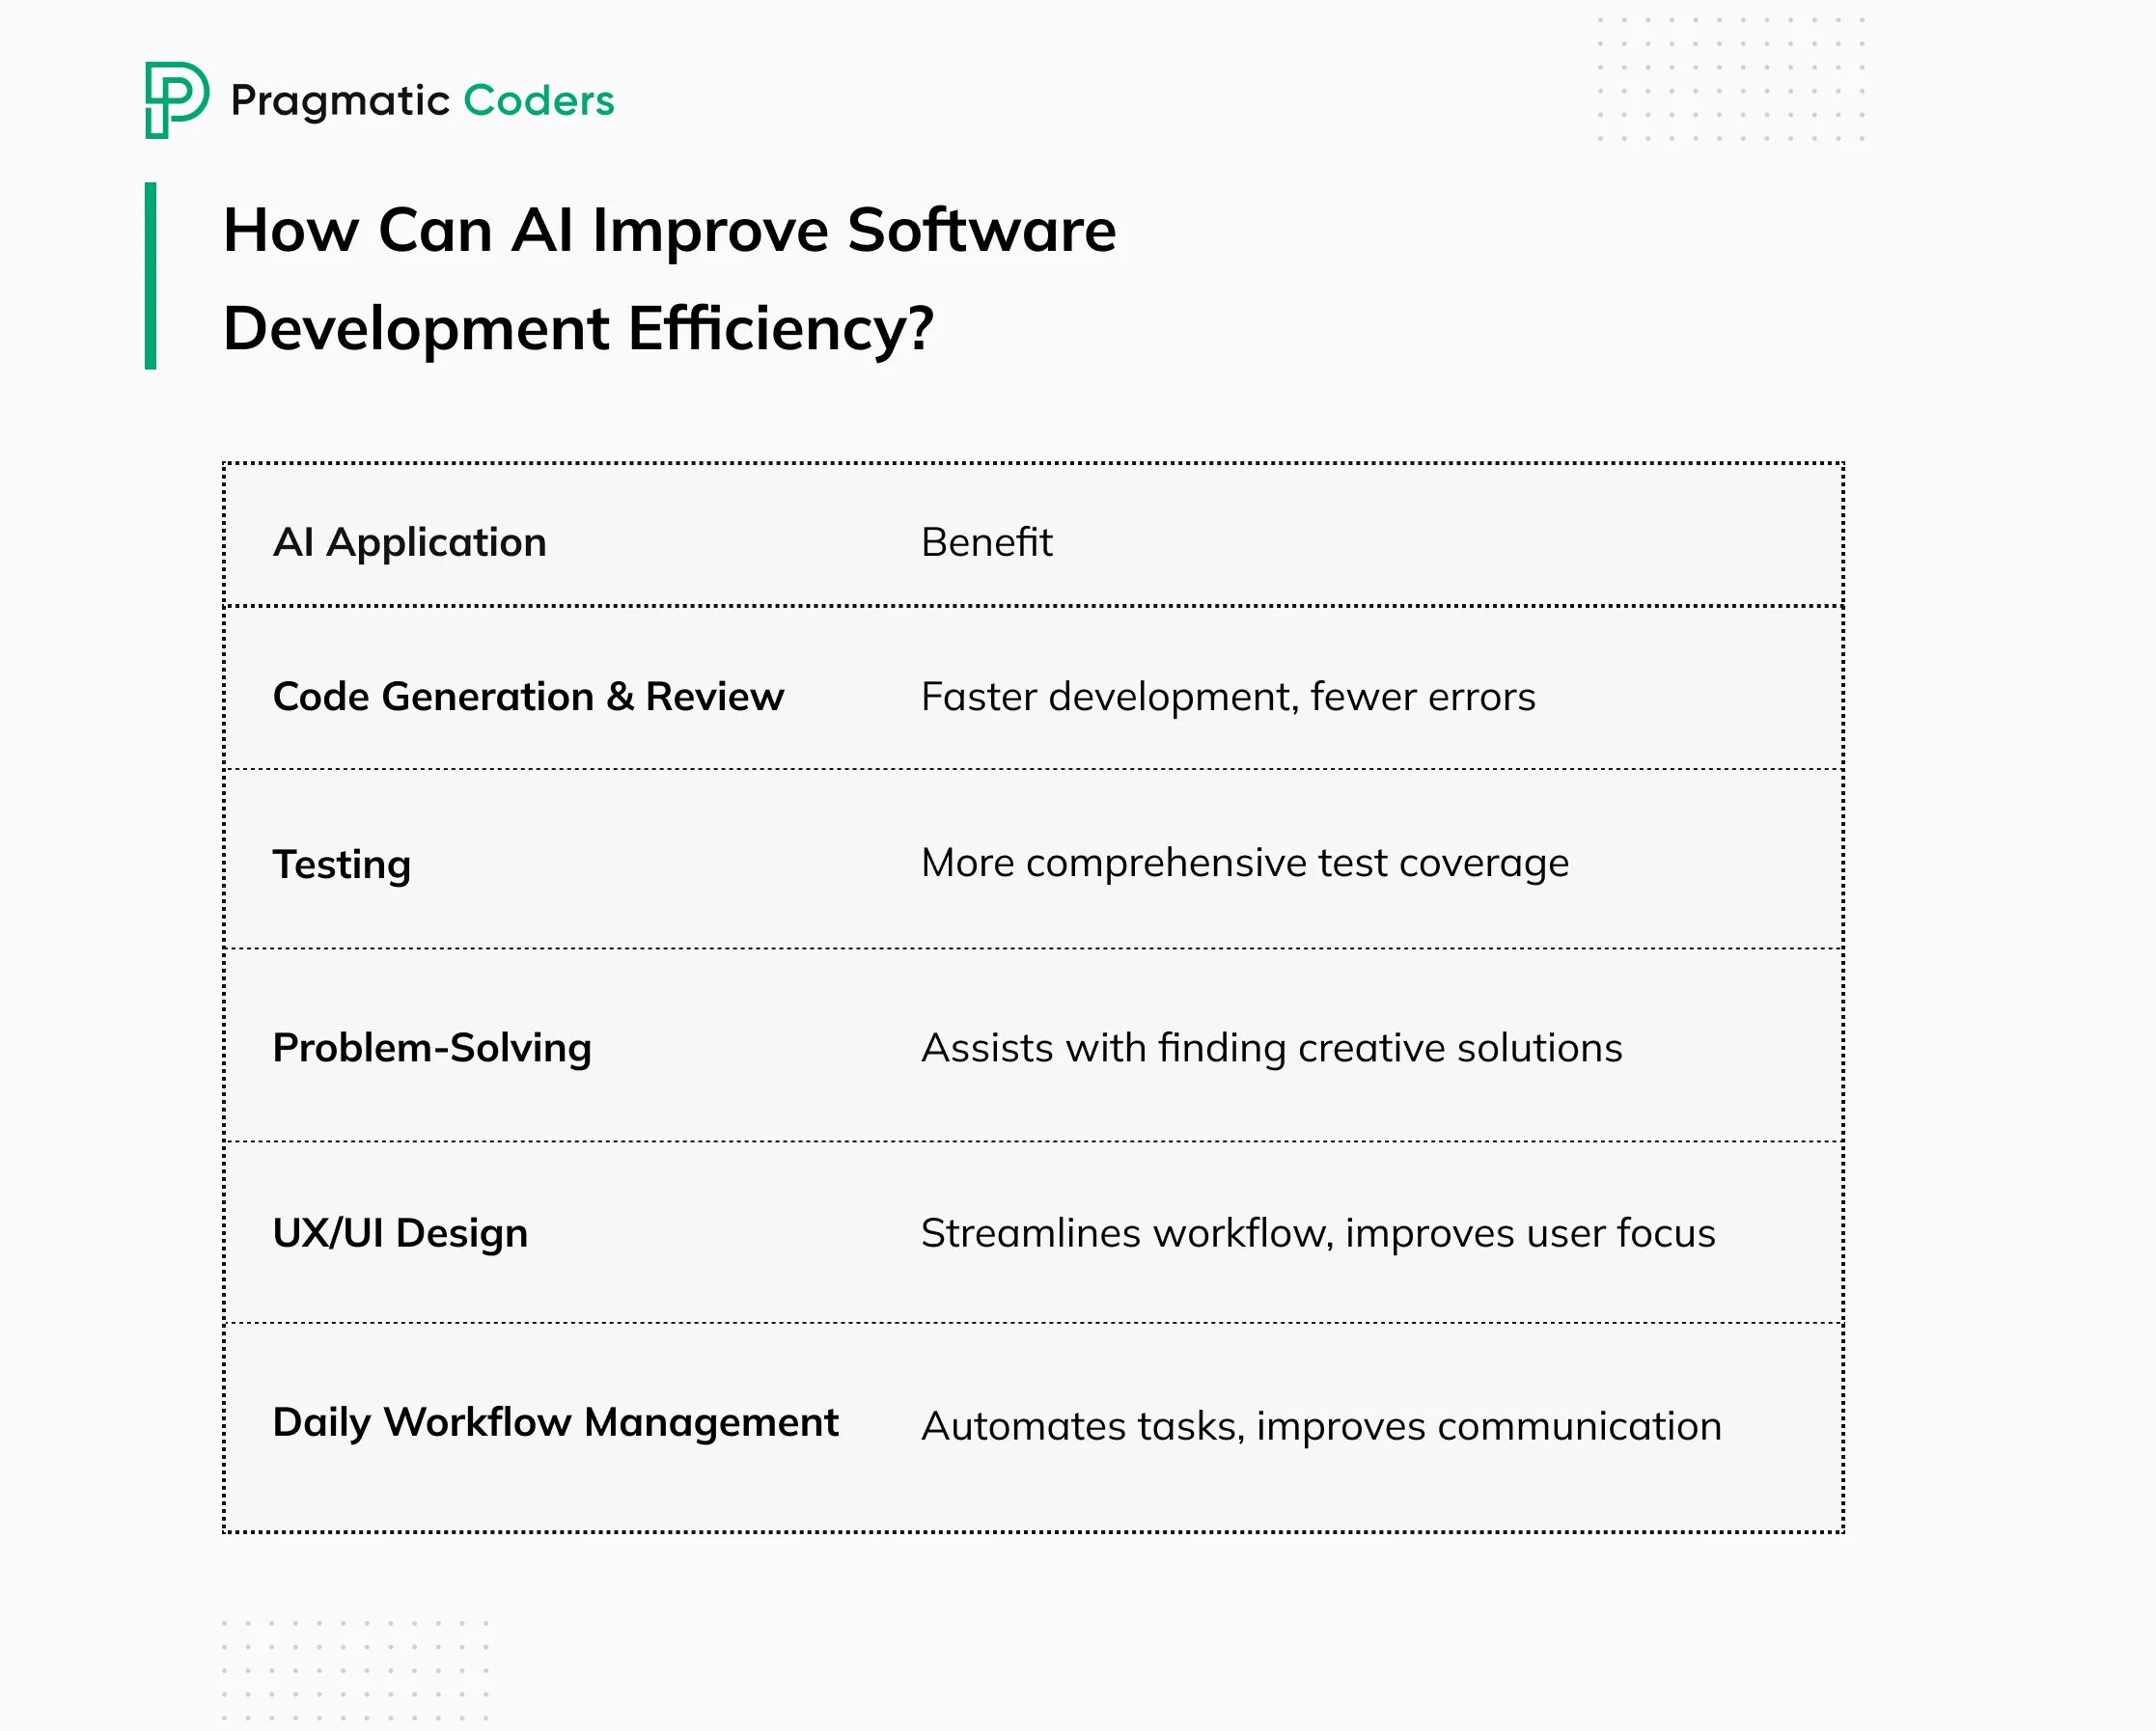 How Can AI Improve Software Development Efficiency?